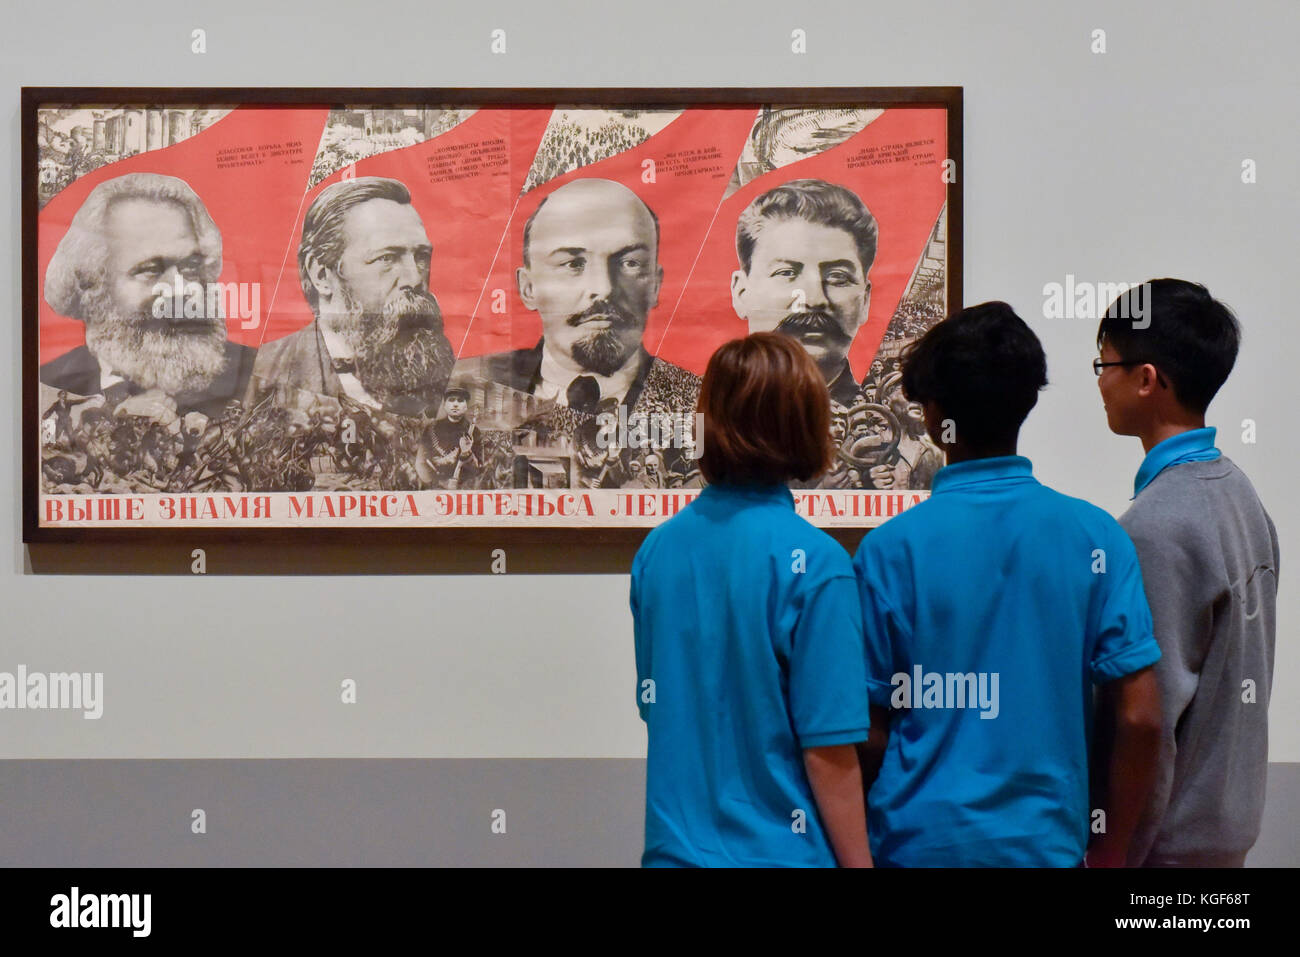 London, UK. 7th Nov, 2017. Students from Thomas Tallis School, Kidbrooke, south London, look at 'Under the Banner of Marx, Engels, Lenin and Stalin!', 1933, by Gustav Klutsis, at a preview of 'Red Star Over Russia: A Revolution in Visual Culture 1905-55' at Tate Modern. The exhibition marks the centenary of the October Revolution and presents the visual history of Russia and the Soviet Union with works drawn primarily from the collection of the late graphic designer David King. Credit: Stephen Chung/Alamy Live News Stock Photo